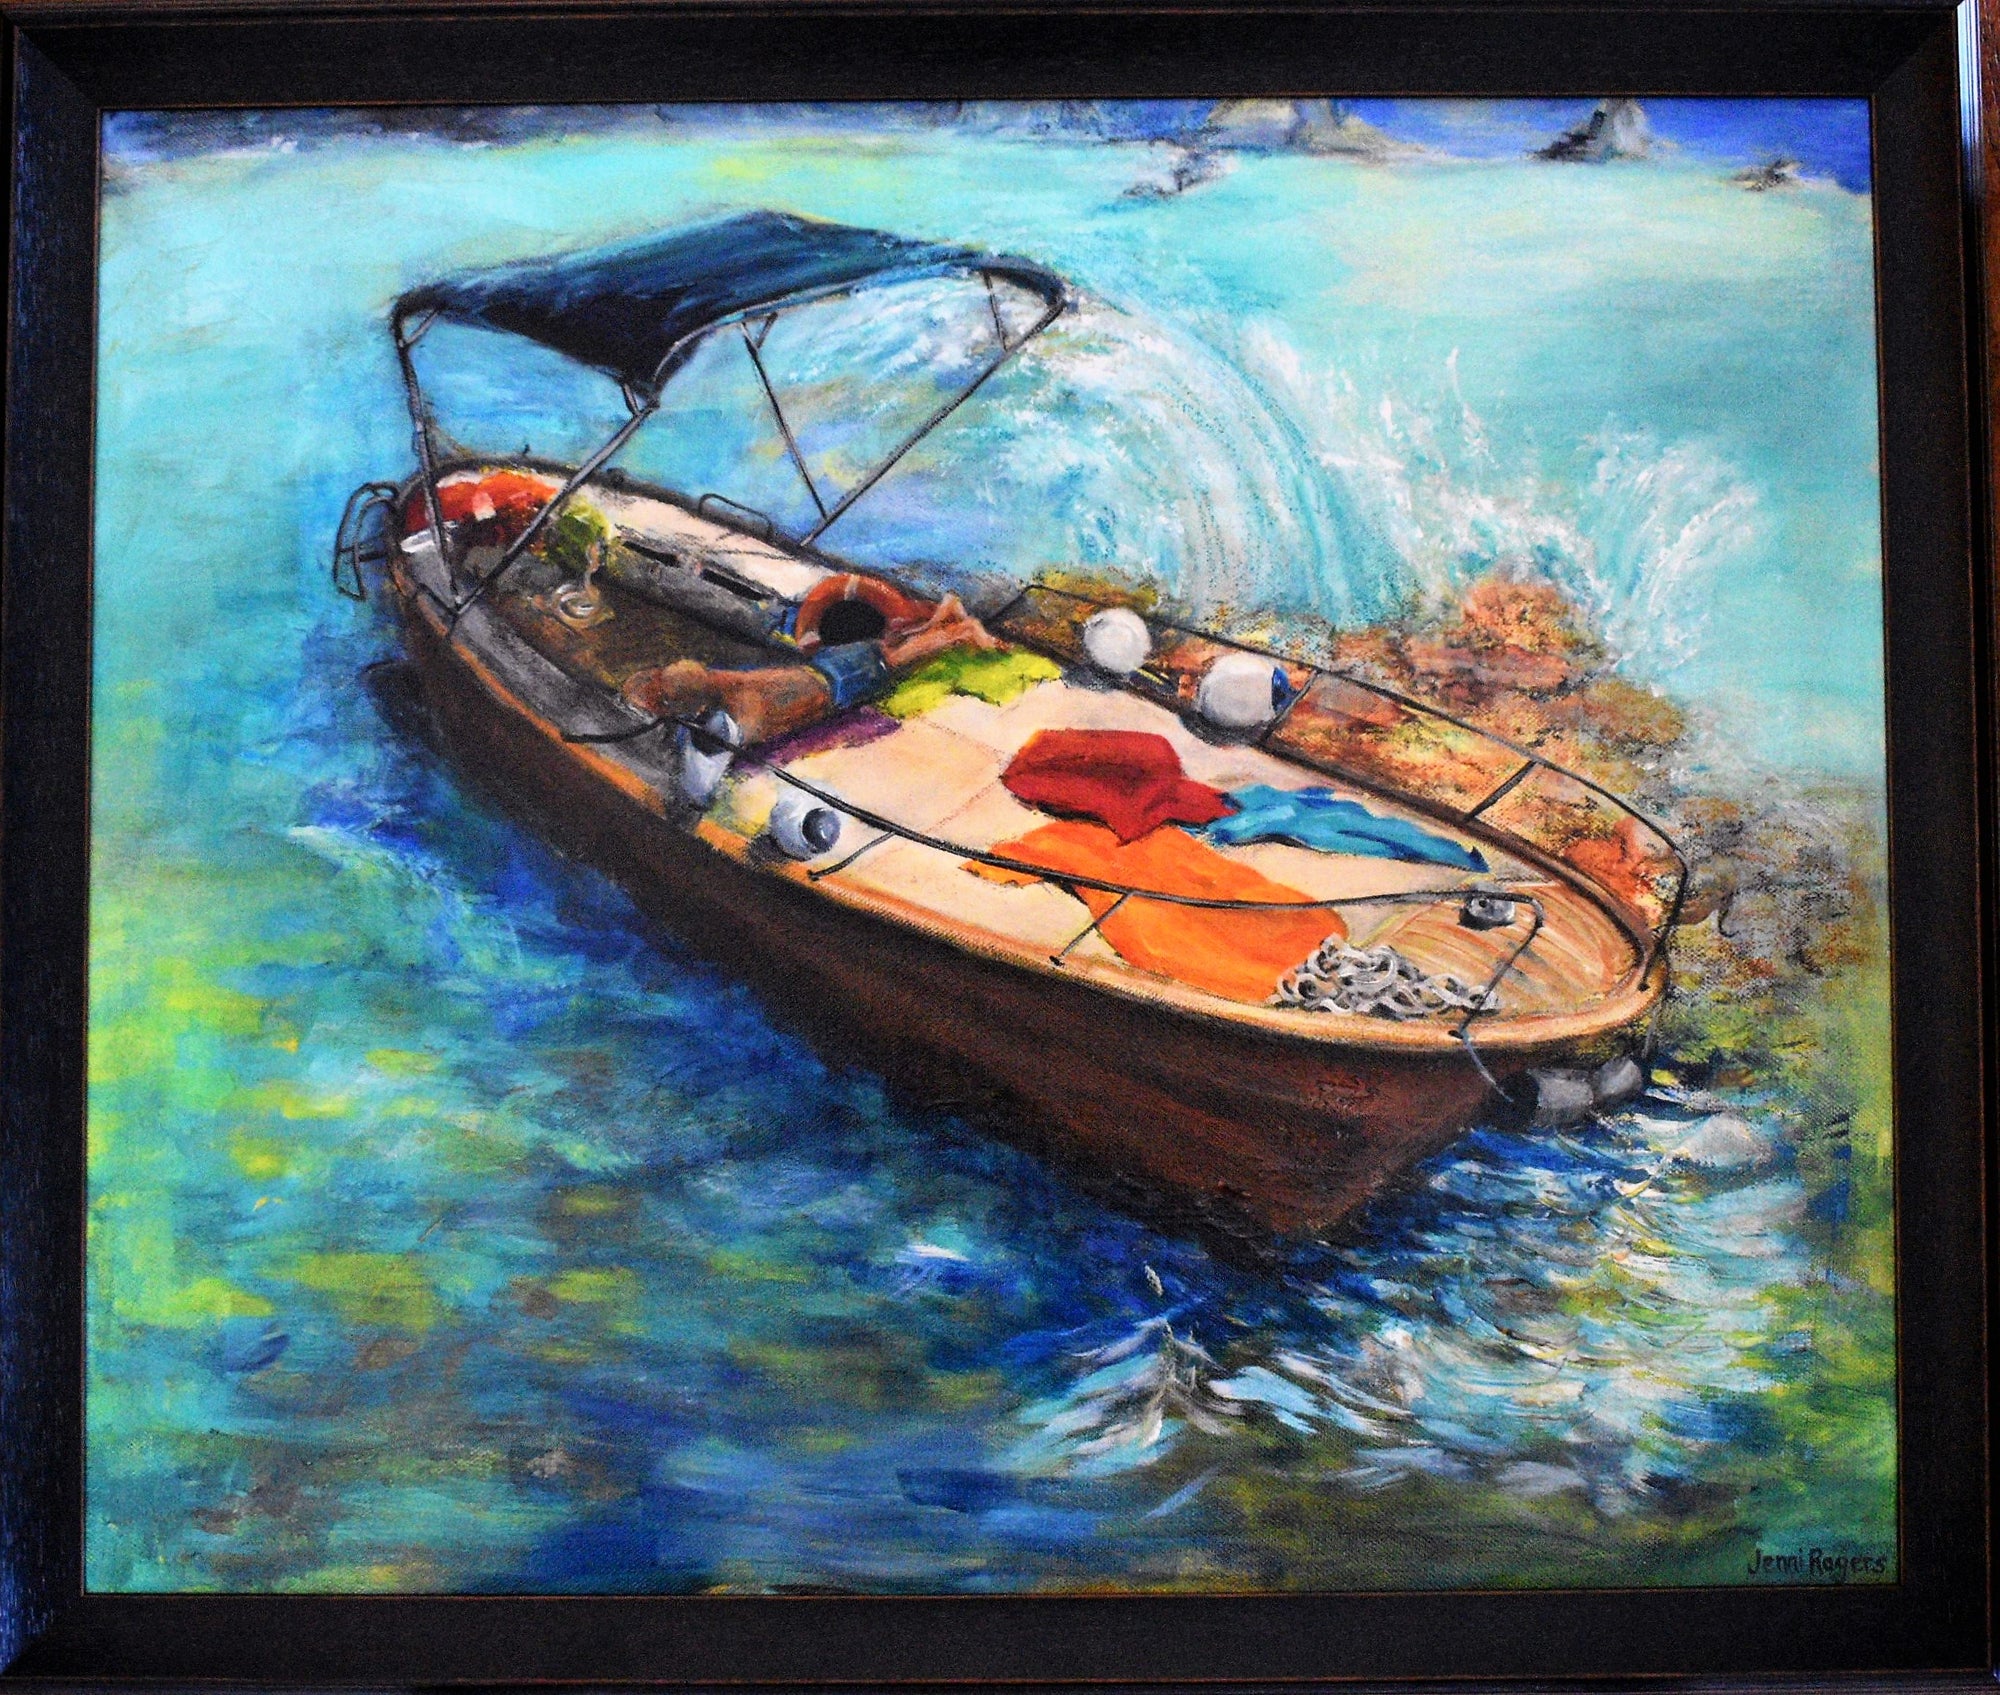 Lazy day on the ocean, between catches, summer breeze, listening to the rhythm of the sea on this hot and humid day on our tour to Cinque Terre, Italy by Australian Artist Jenni Rogers